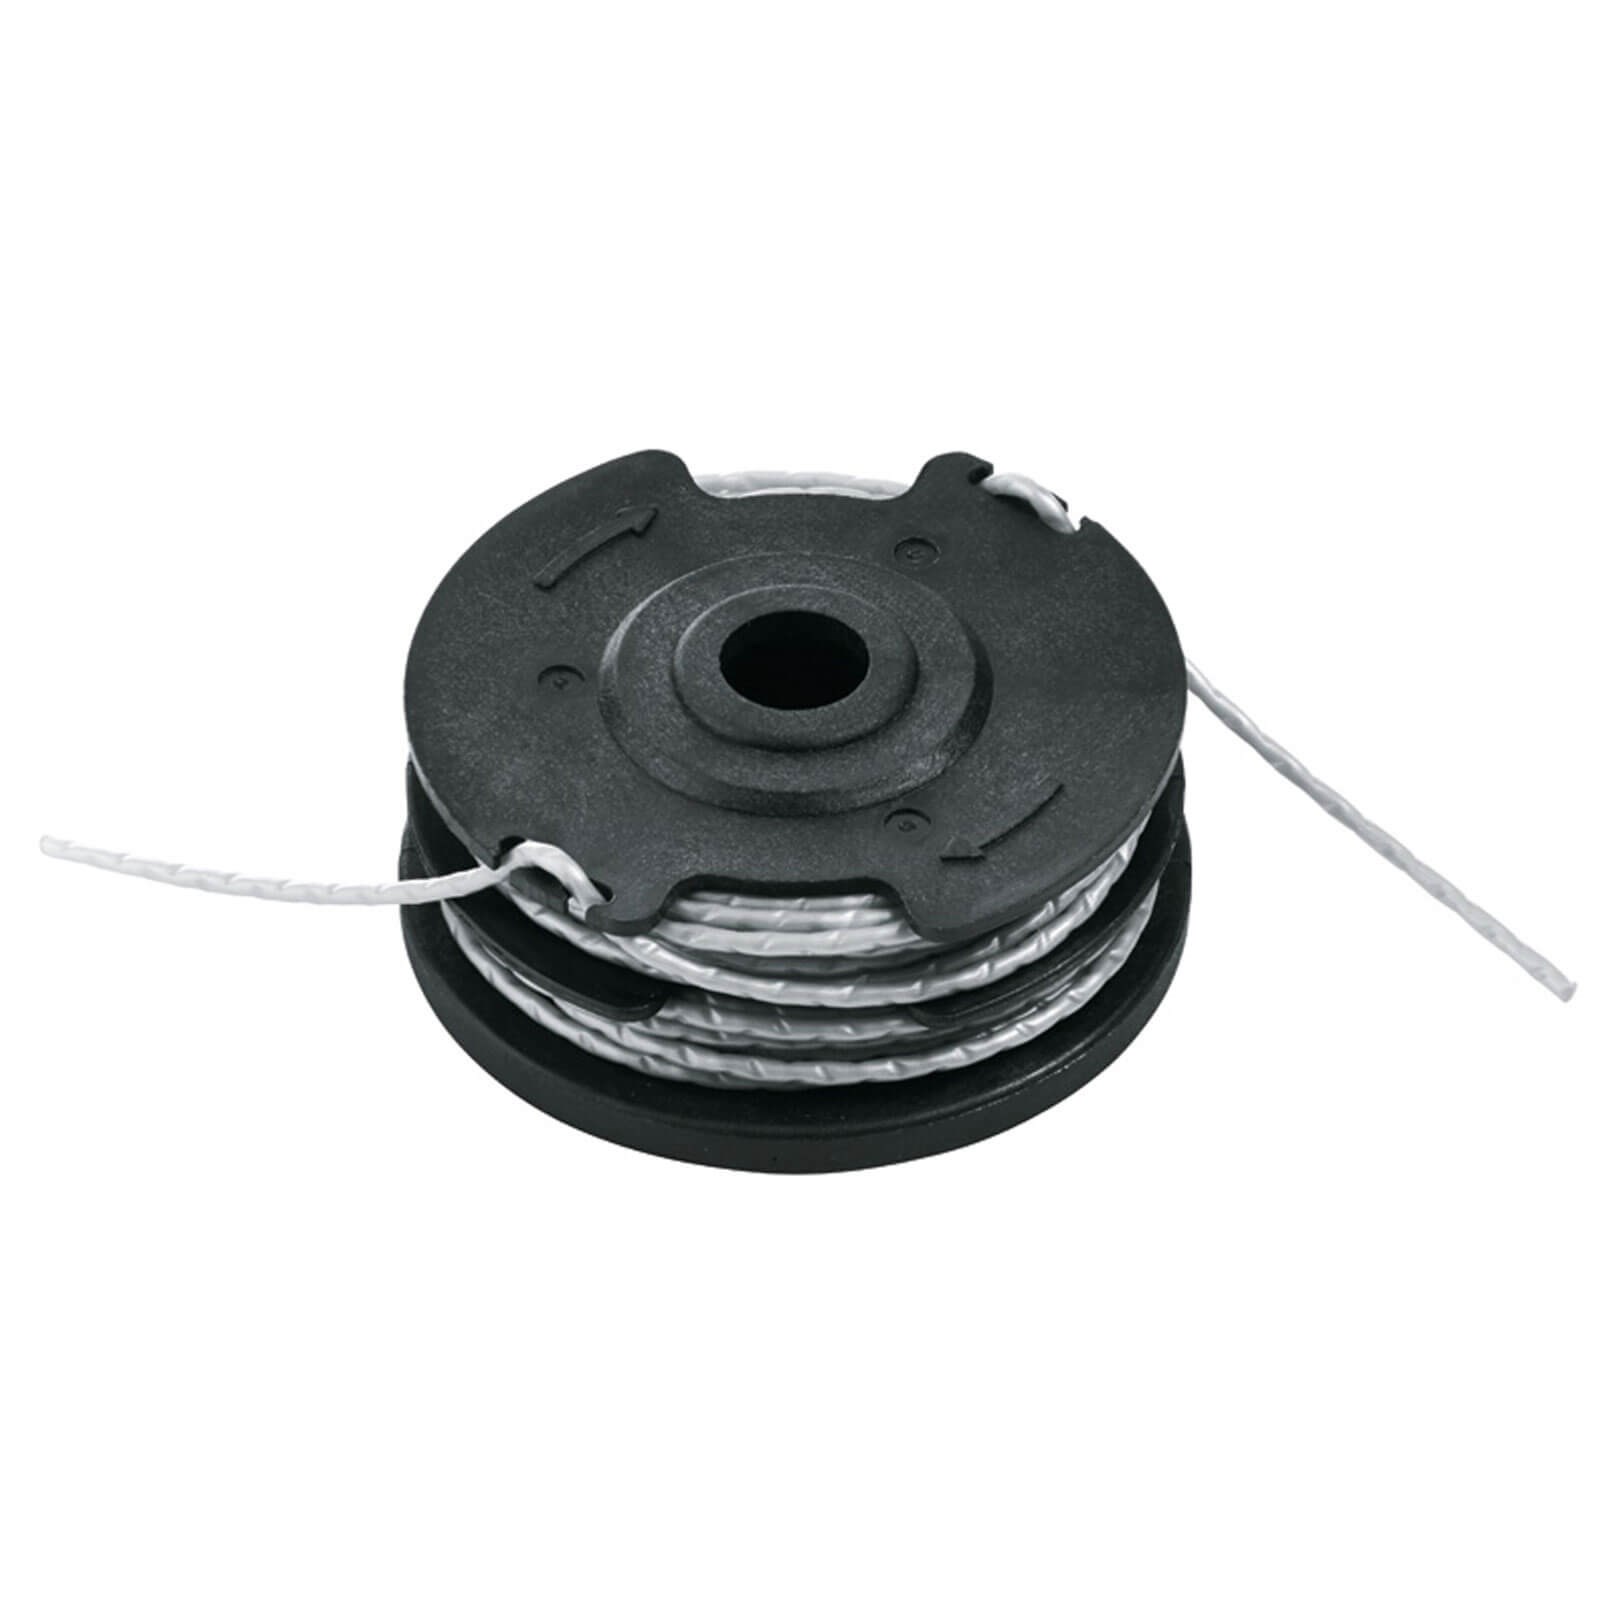 Bosch Spool and Line for ART 24, 27, 30 and 36v Grass Trimmers | Spool & Line